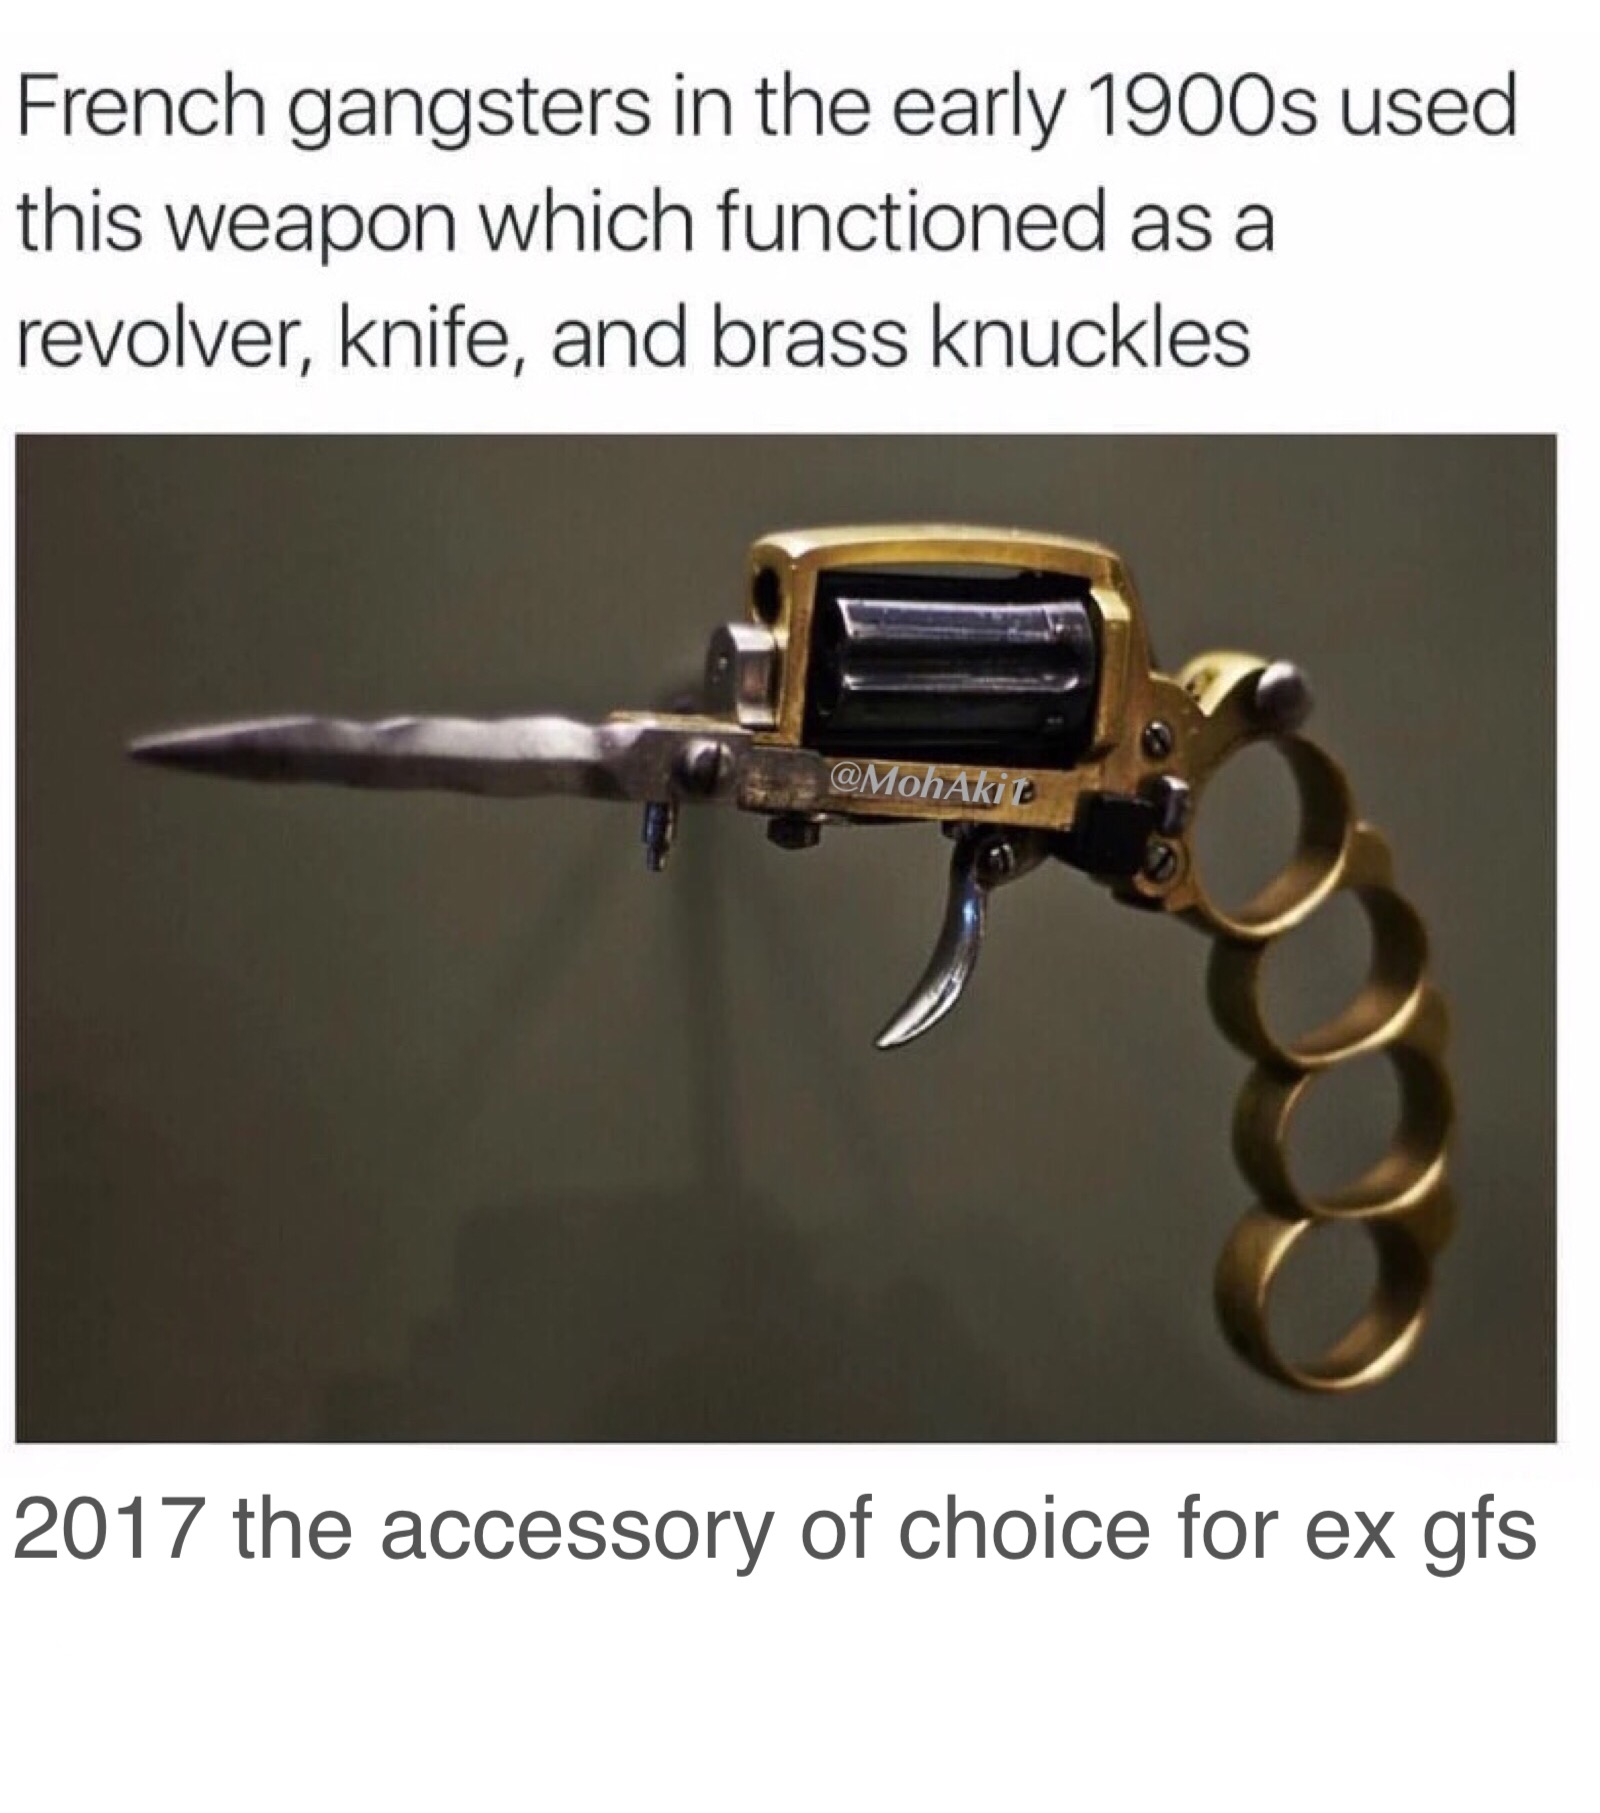 meme - dumbest weapons - French gangsters in the early 1900s used this weapon which functioned as a revolver, knife, and brass knuckles 2017 the accessory of choice for ex gfs